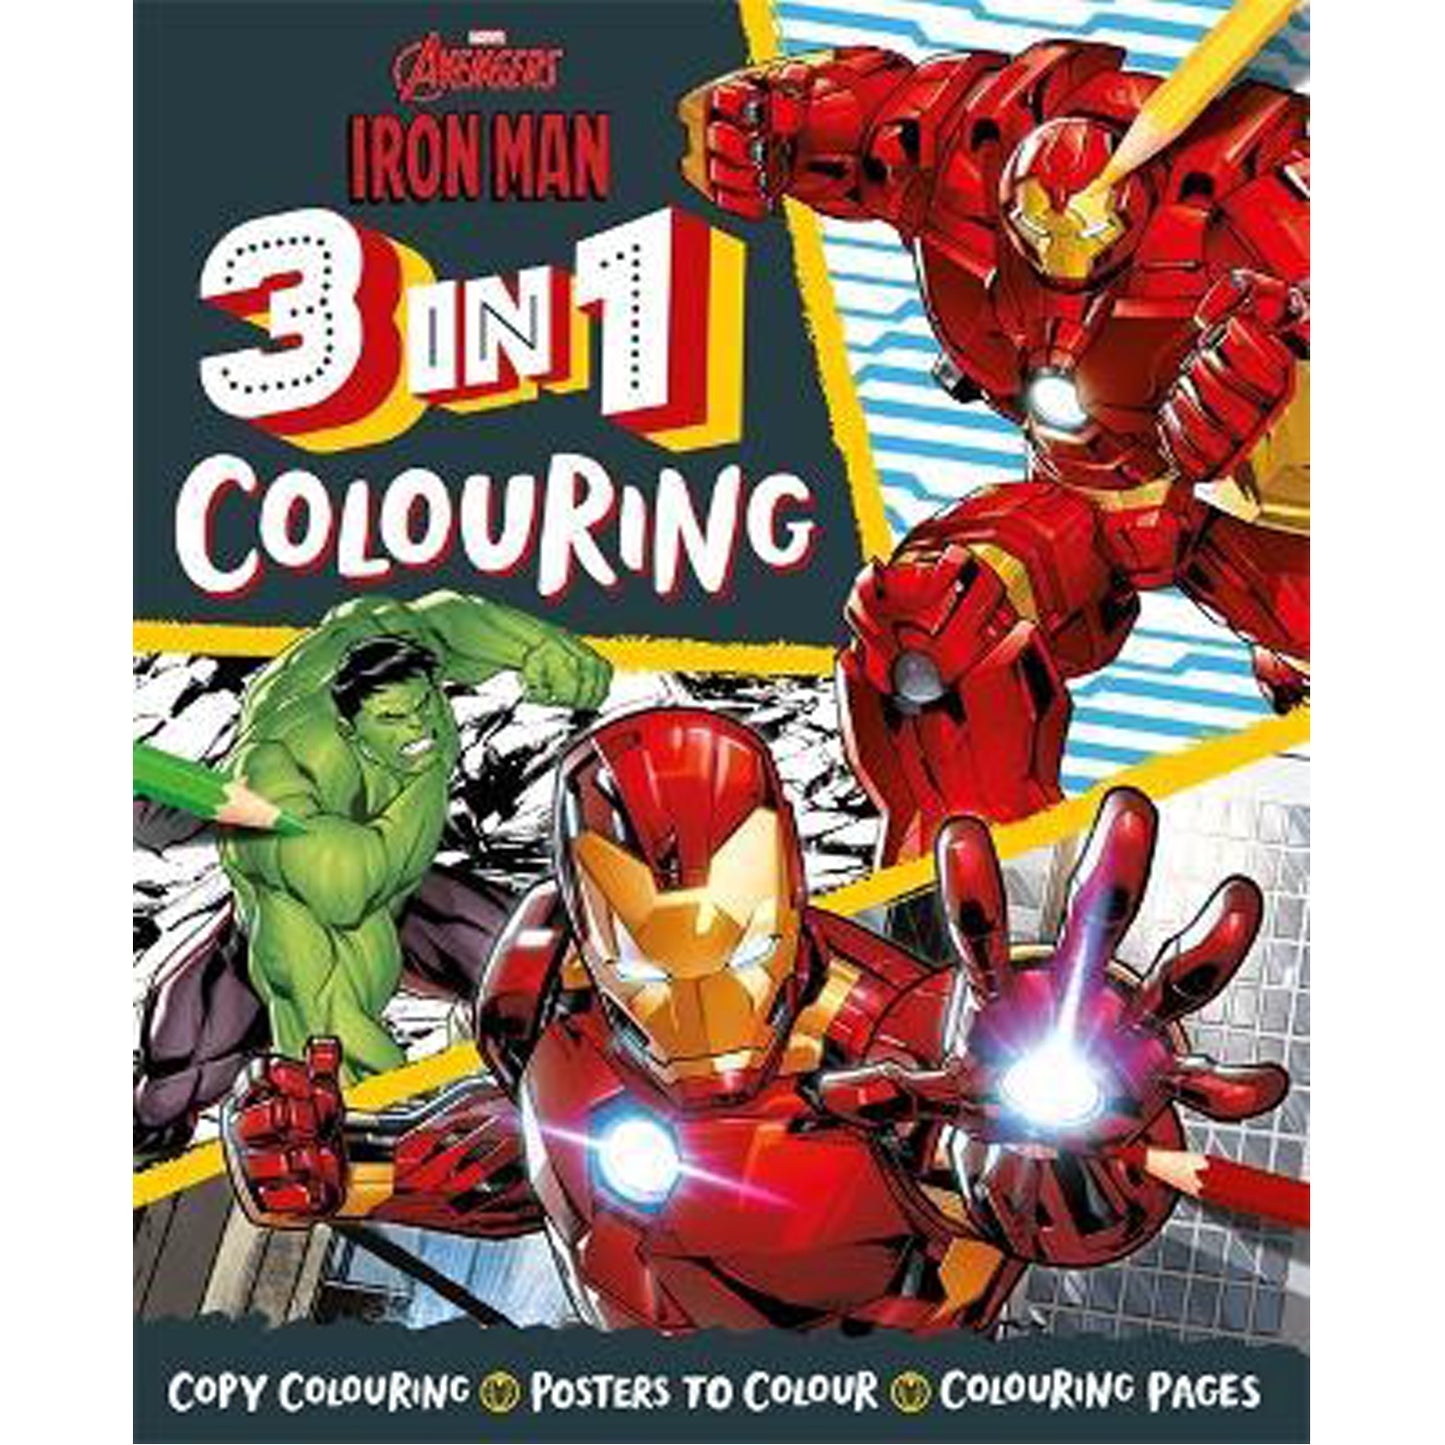 Marvel Iron Man: 3 in 1 Colouring